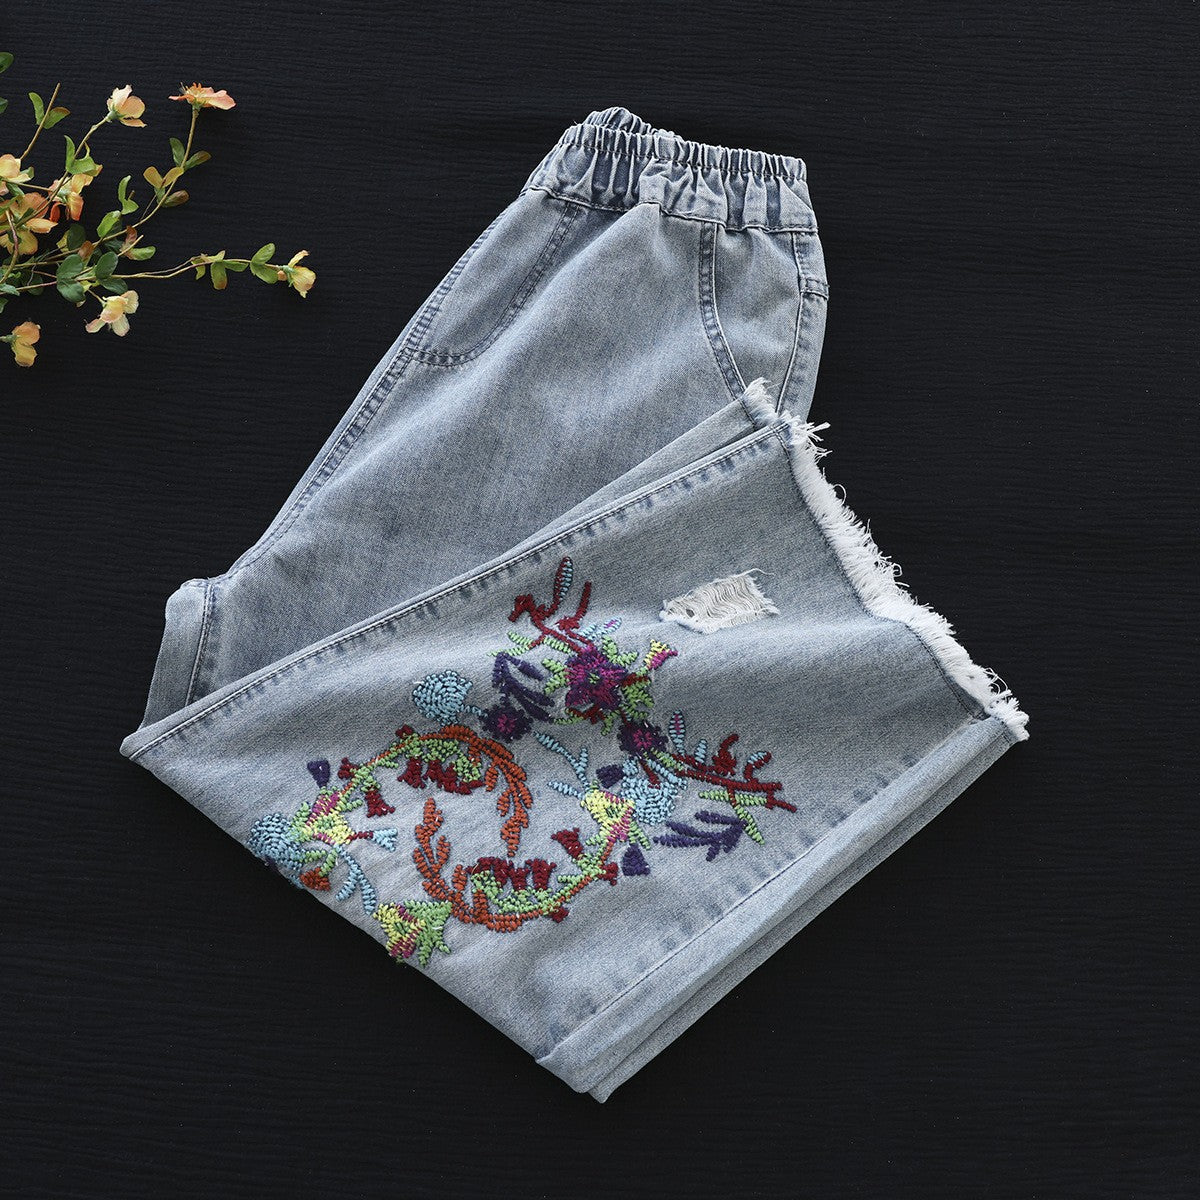 Casual embroidered fuzzy trim baggy jeans for women